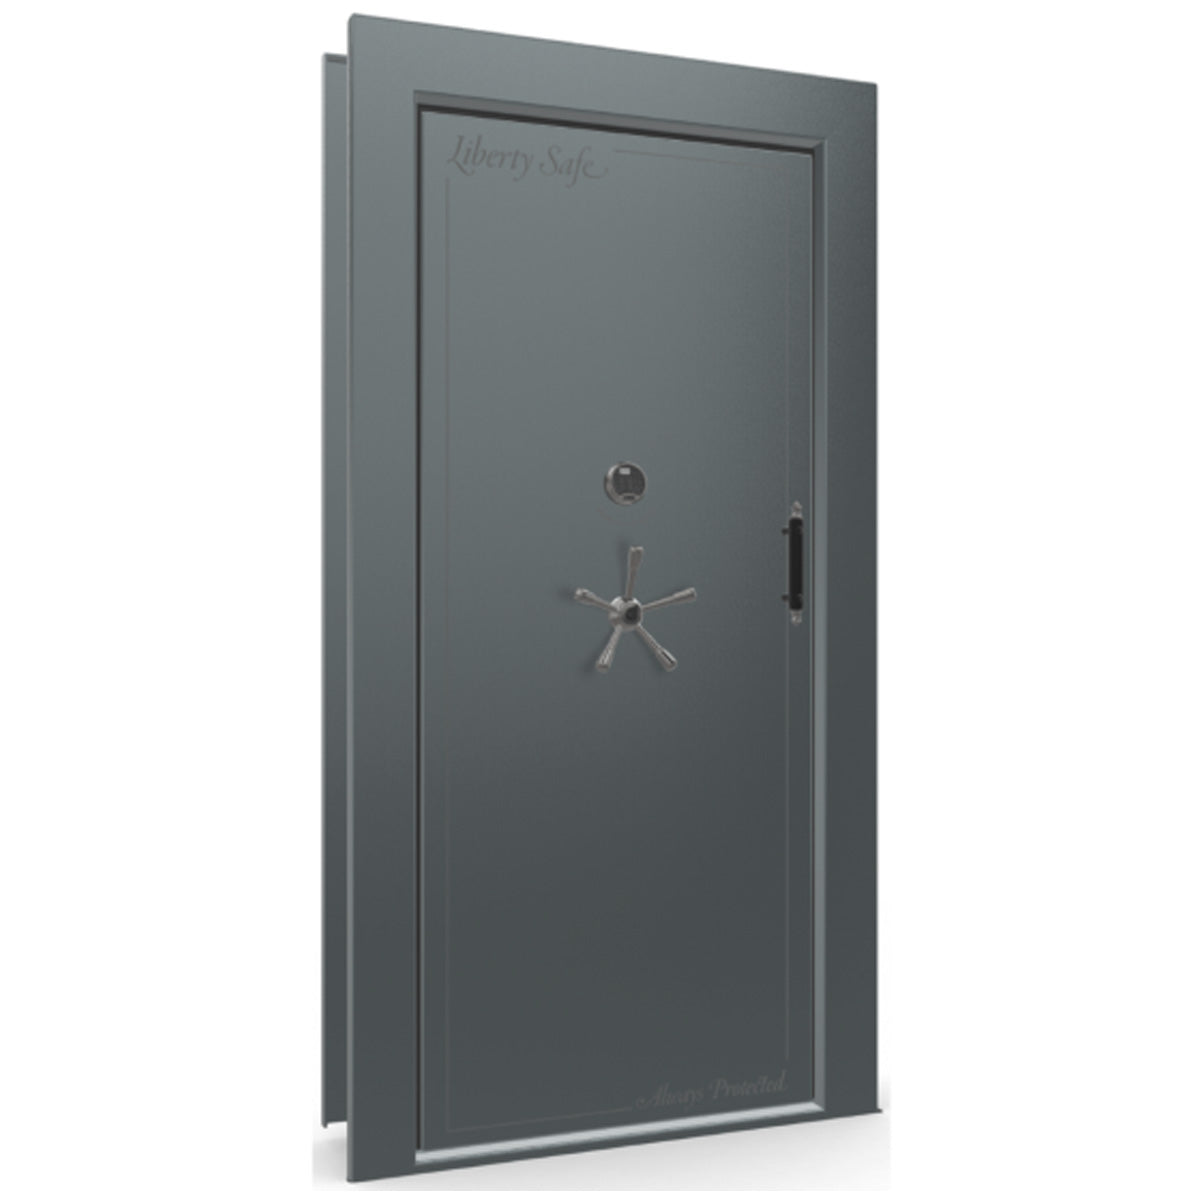 The Beast Vault Door in Forest Mist Gloss with Black Chrome Electronic Lock, Left Inswing, door closed.